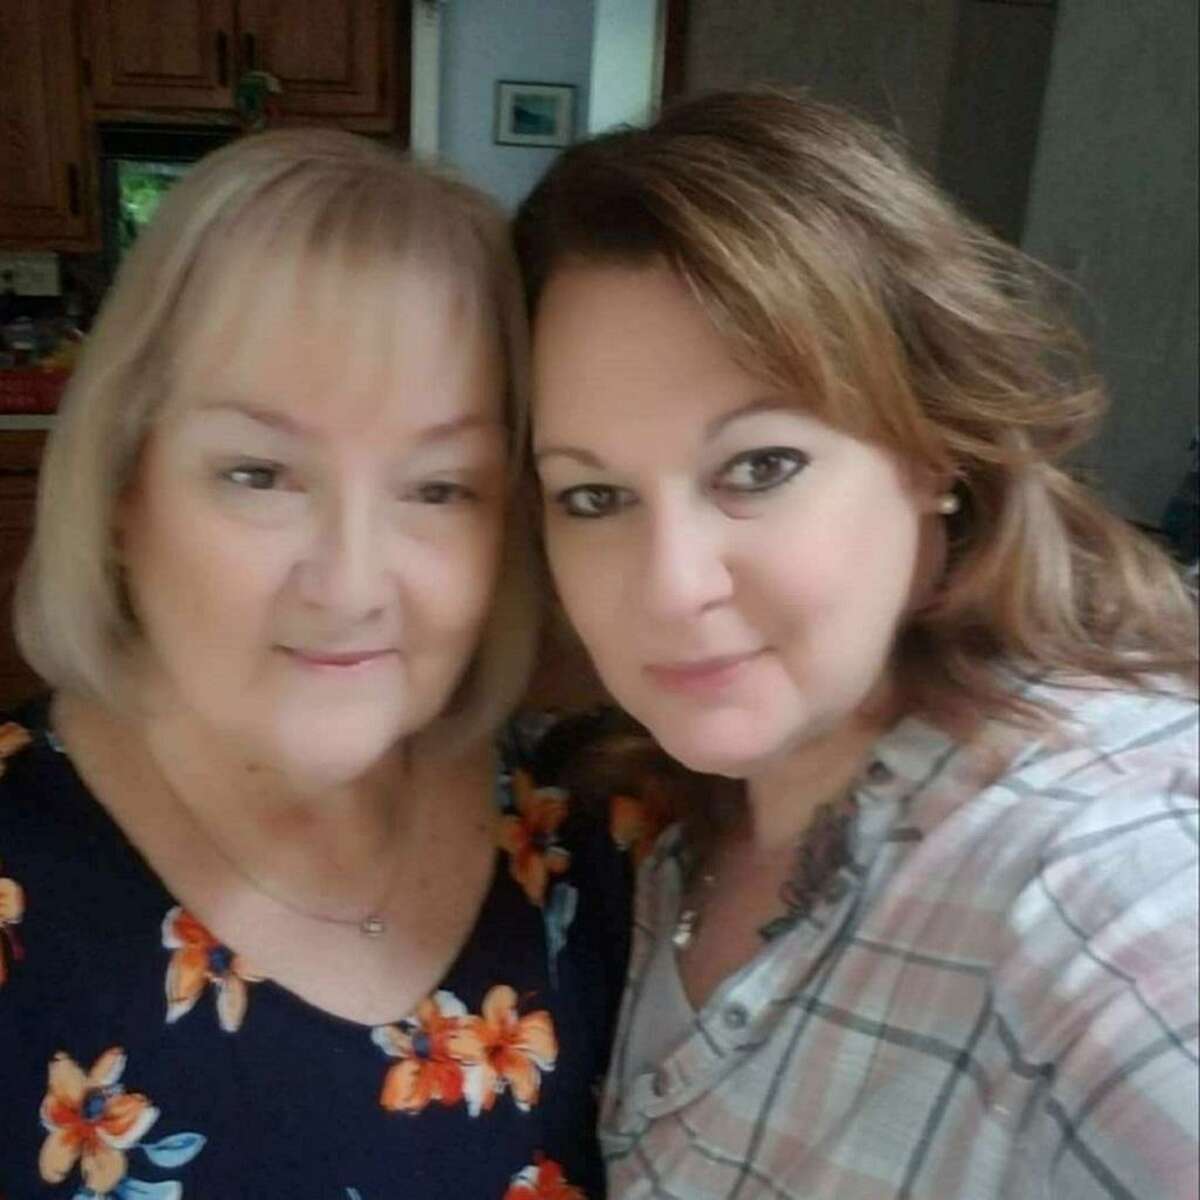 Left to right: Cheryl Schulz and her daughter, Erica Schulz Taylor.